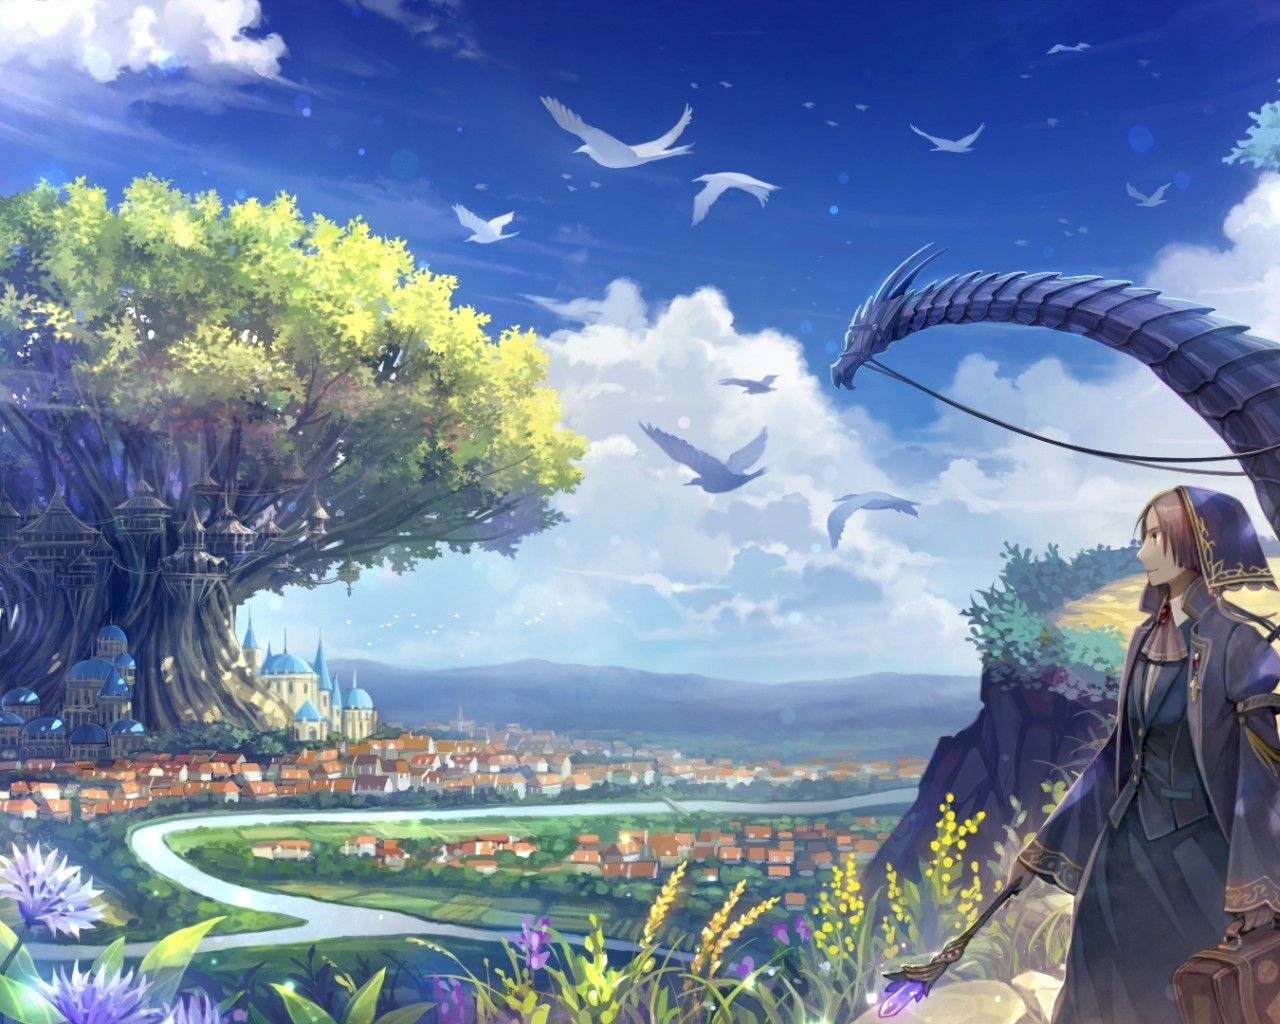 Download 1280x1024 Anime Fantasy World, Giant Tree, Birds, Clouds, Cityscape, Staff, Creature Wallpaper